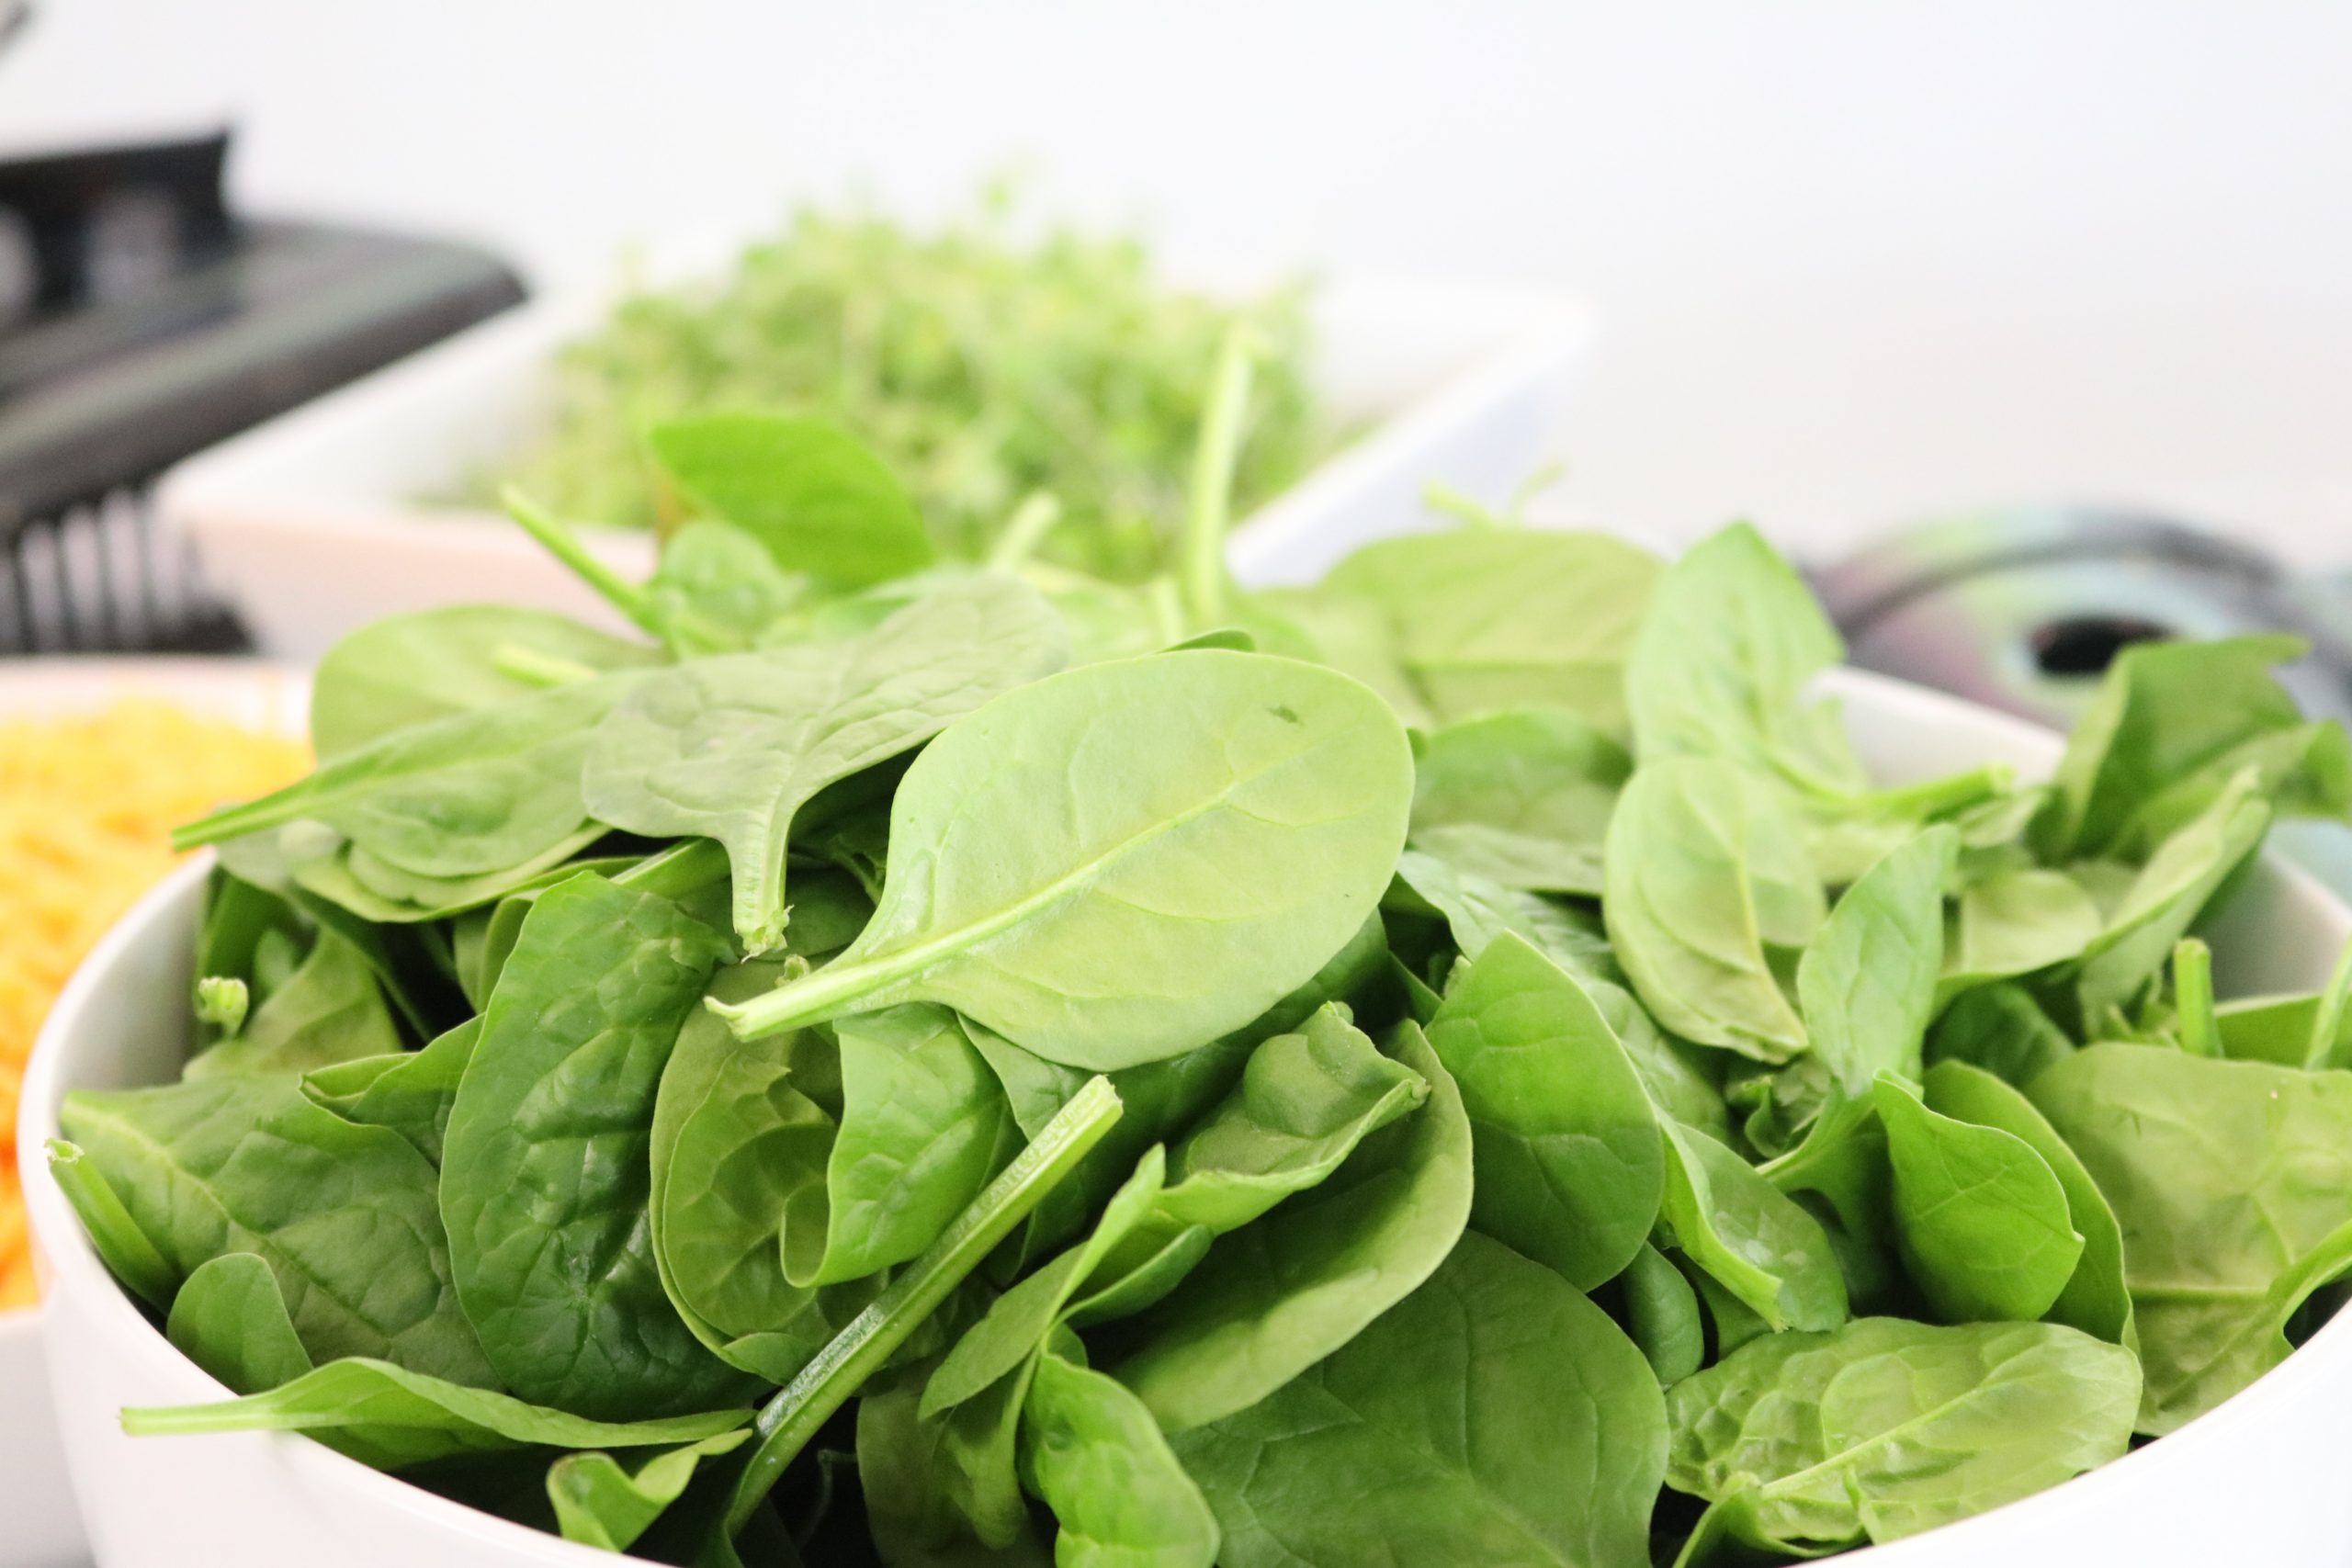 Bowl of spinach leaves. Spinach leaves are a great source of folate and can reduce our risk of folate deficiency anemia